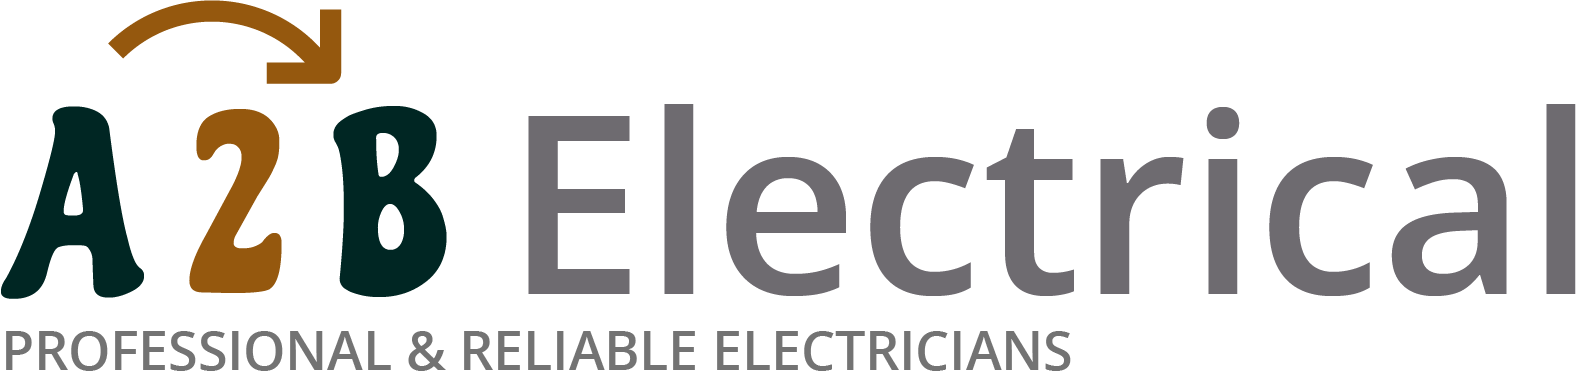 If you have electrical wiring problems in Hartlepool, we can provide an electrician to have a look for you. 